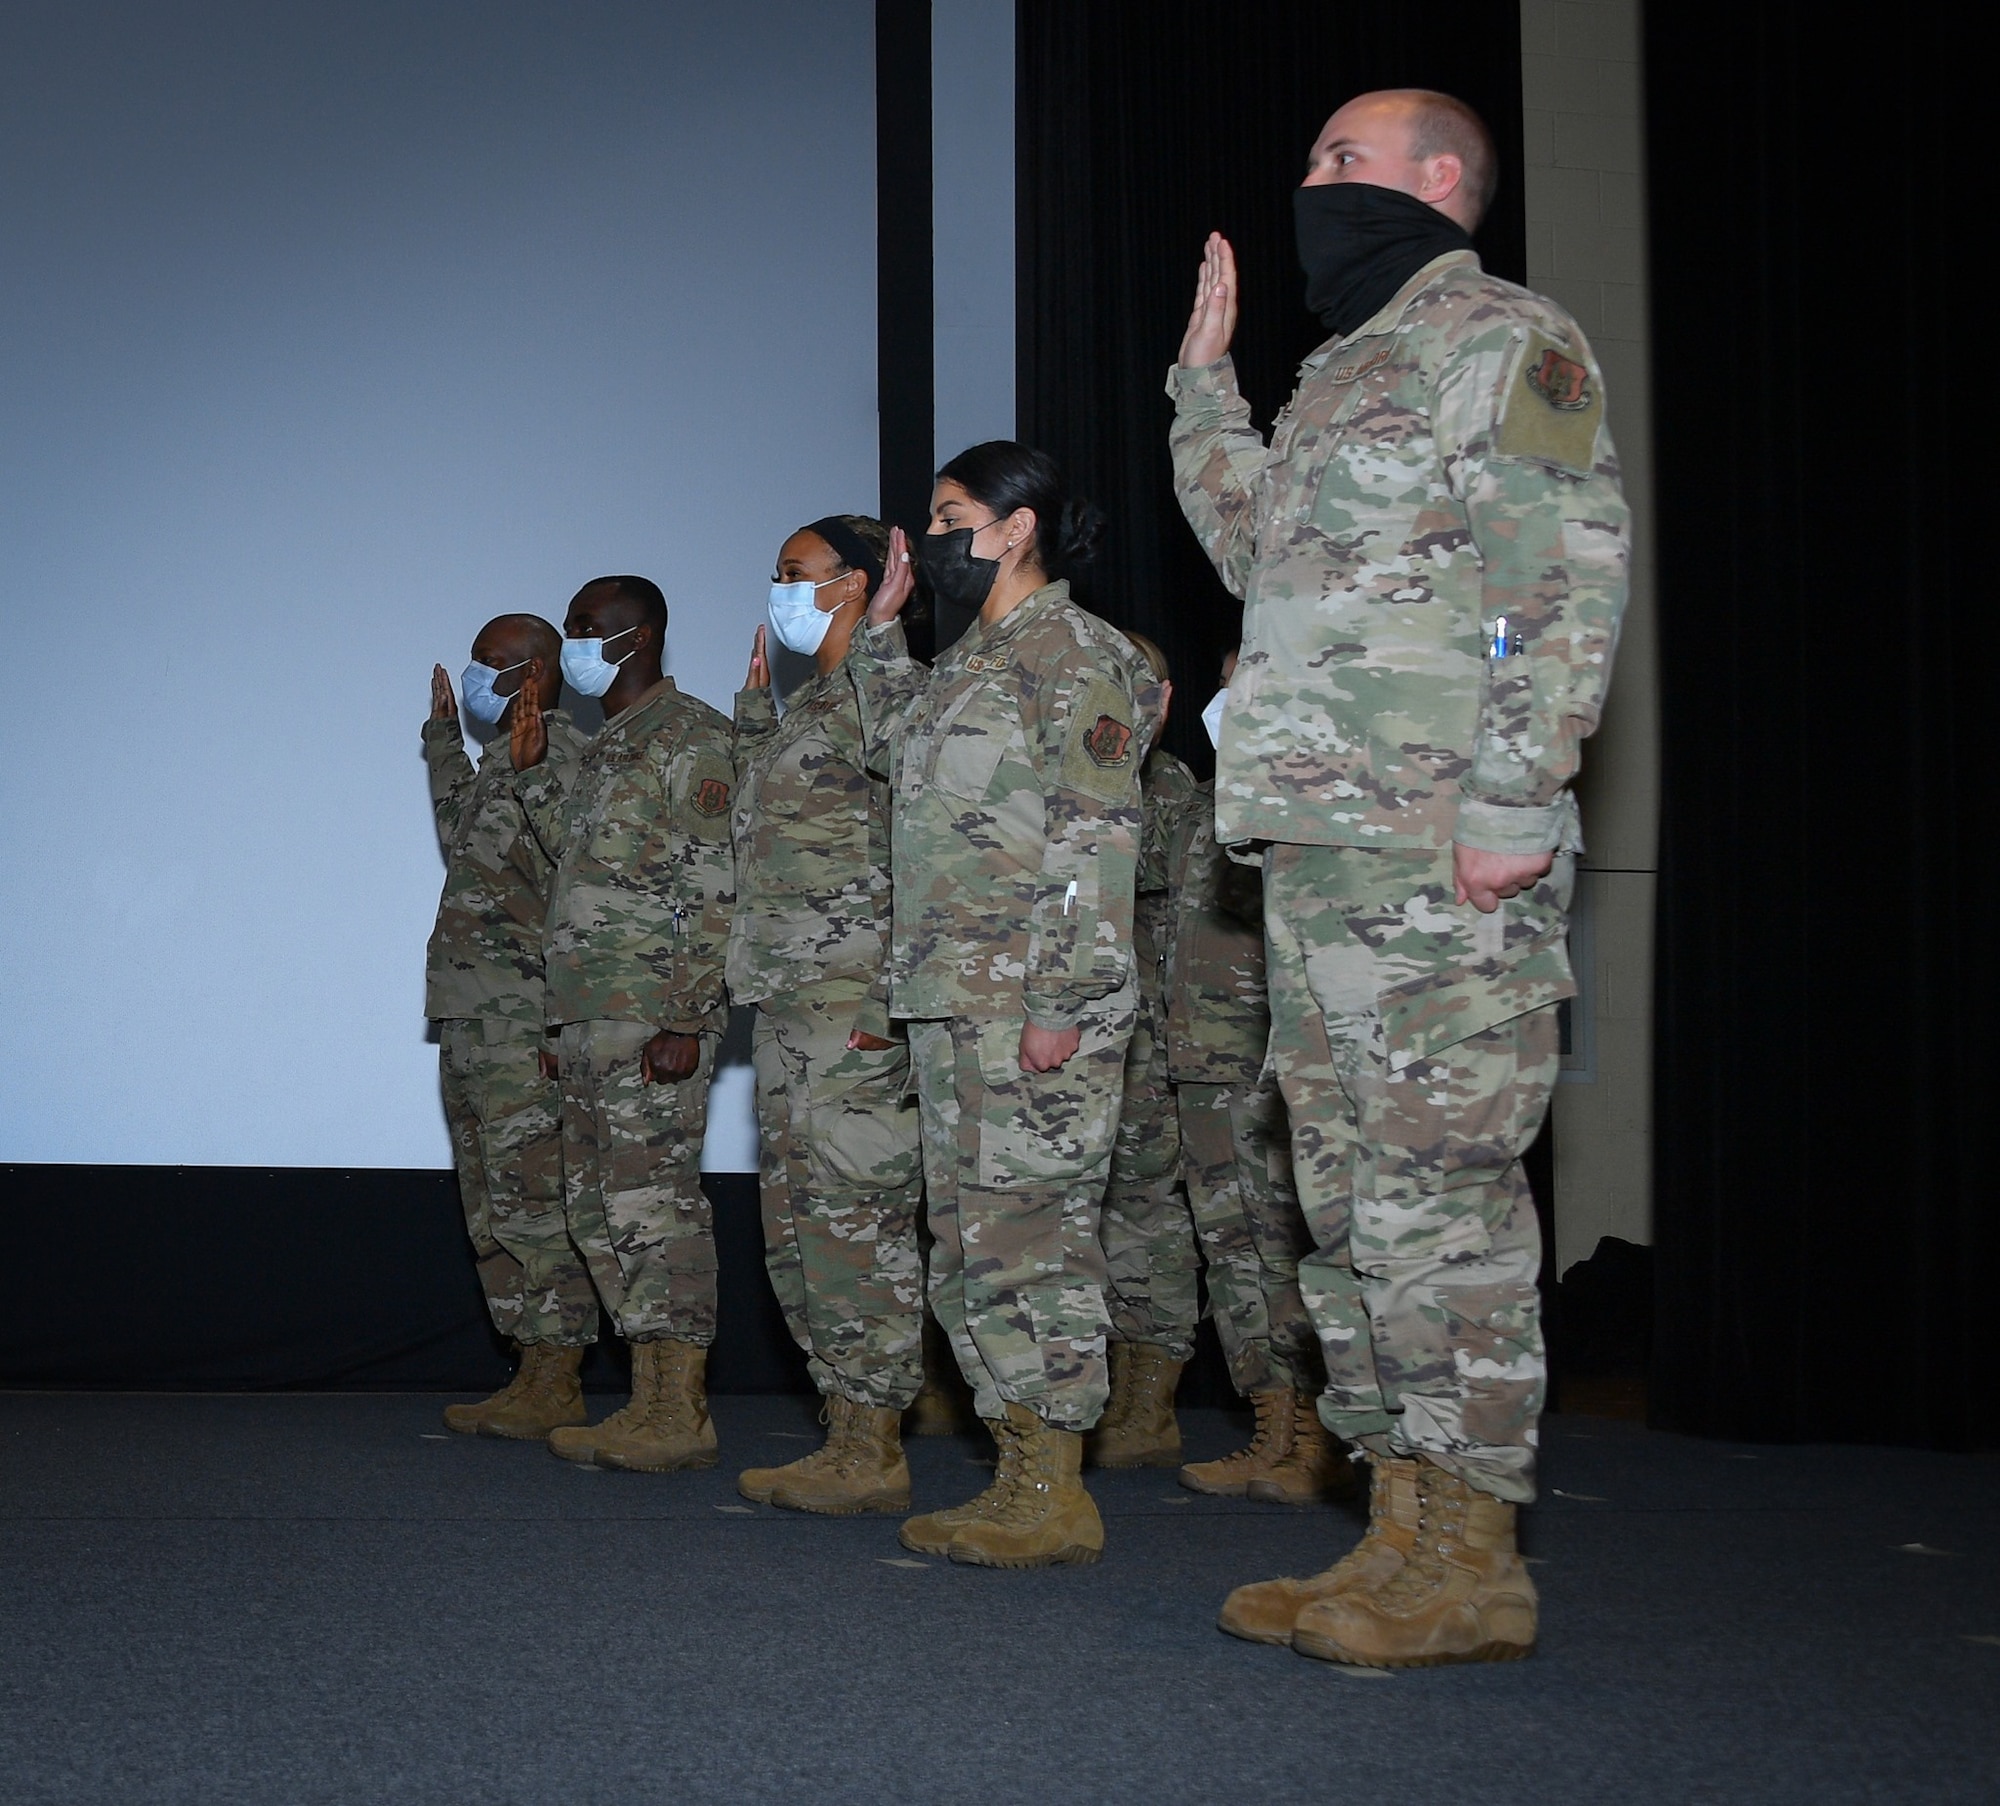 The 301st Fighter Wing Medical Squadron's junior enlisted Airmen  transition to the Non-Commissioned Officer ranks during an MDS enlisted promotion ceremony at NAS JRB Fort Worth on August 8, 2021. Airmen at this level take on the expectation of leading and developing junior Airmen to advance in their respective careers. (U.S. Air Force photo by Master Sgt. Jeremy Roman)